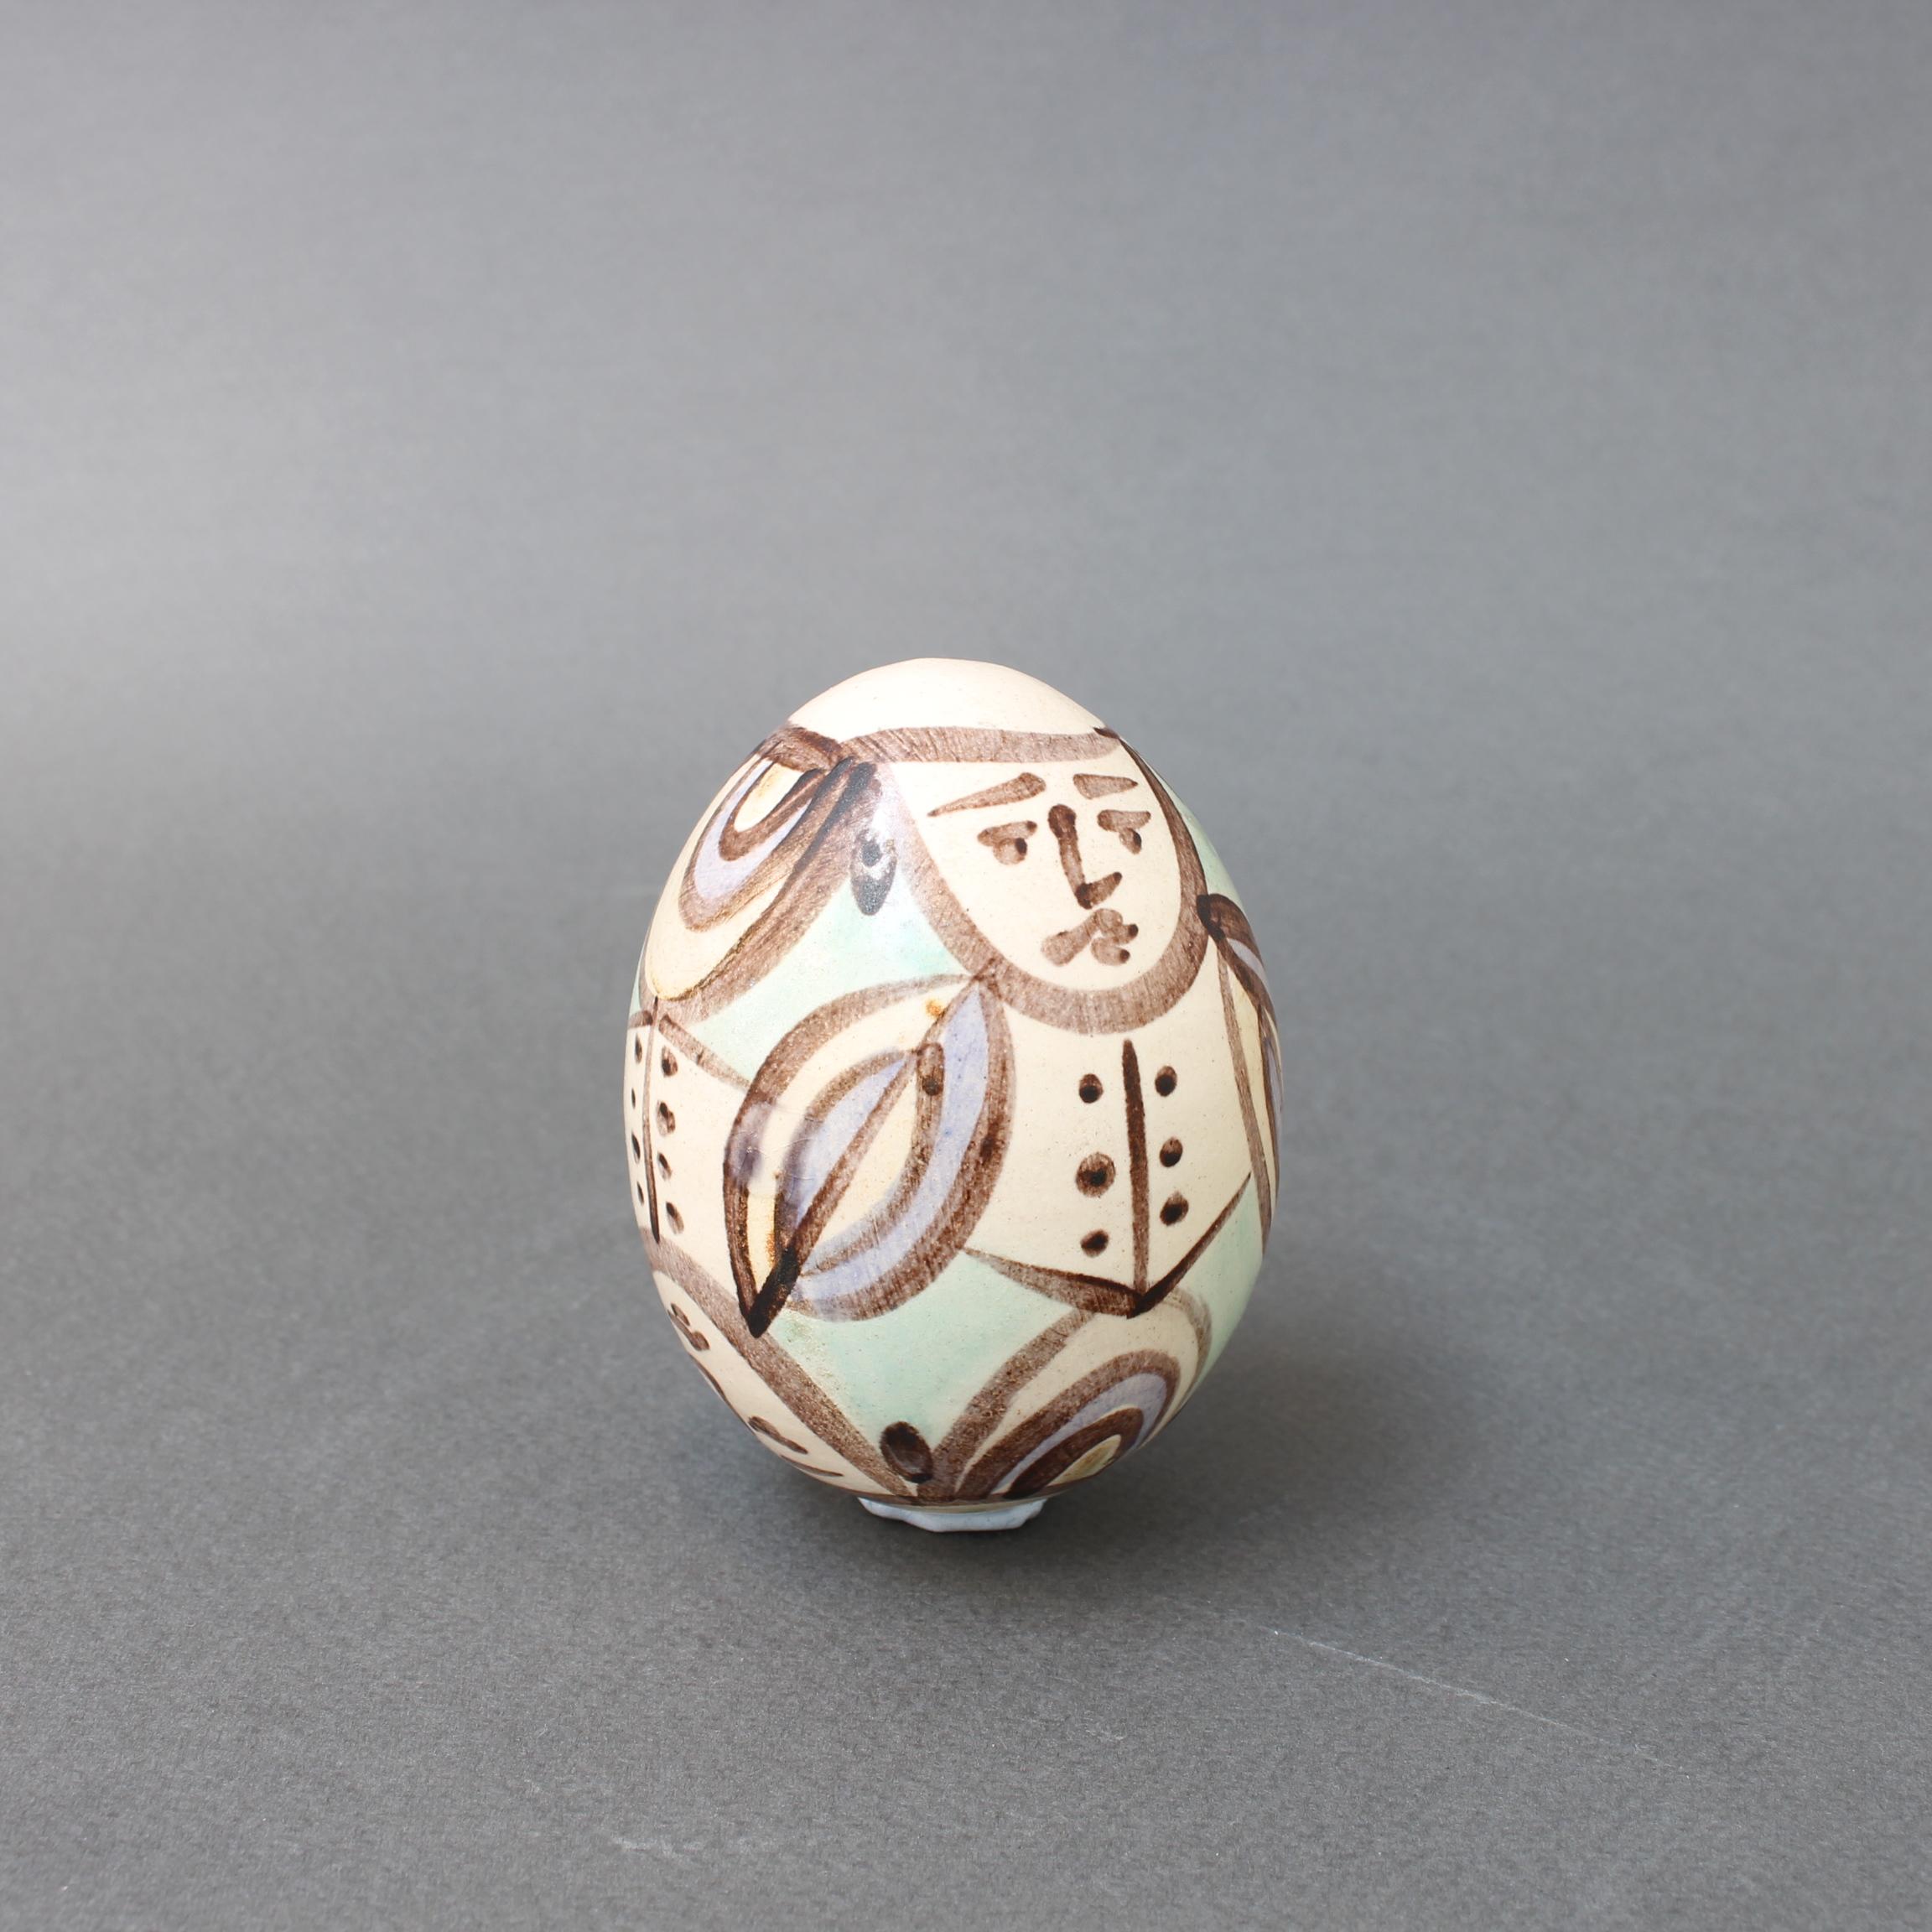 Vintage ceramic egg figure from Atelier Madoura, Vallauris, France (circa 1960s). This egg-sized ceramic figure is painted with a stylized suited man with a frown on his face. It is a simply but elegantly painted work with many charms and would